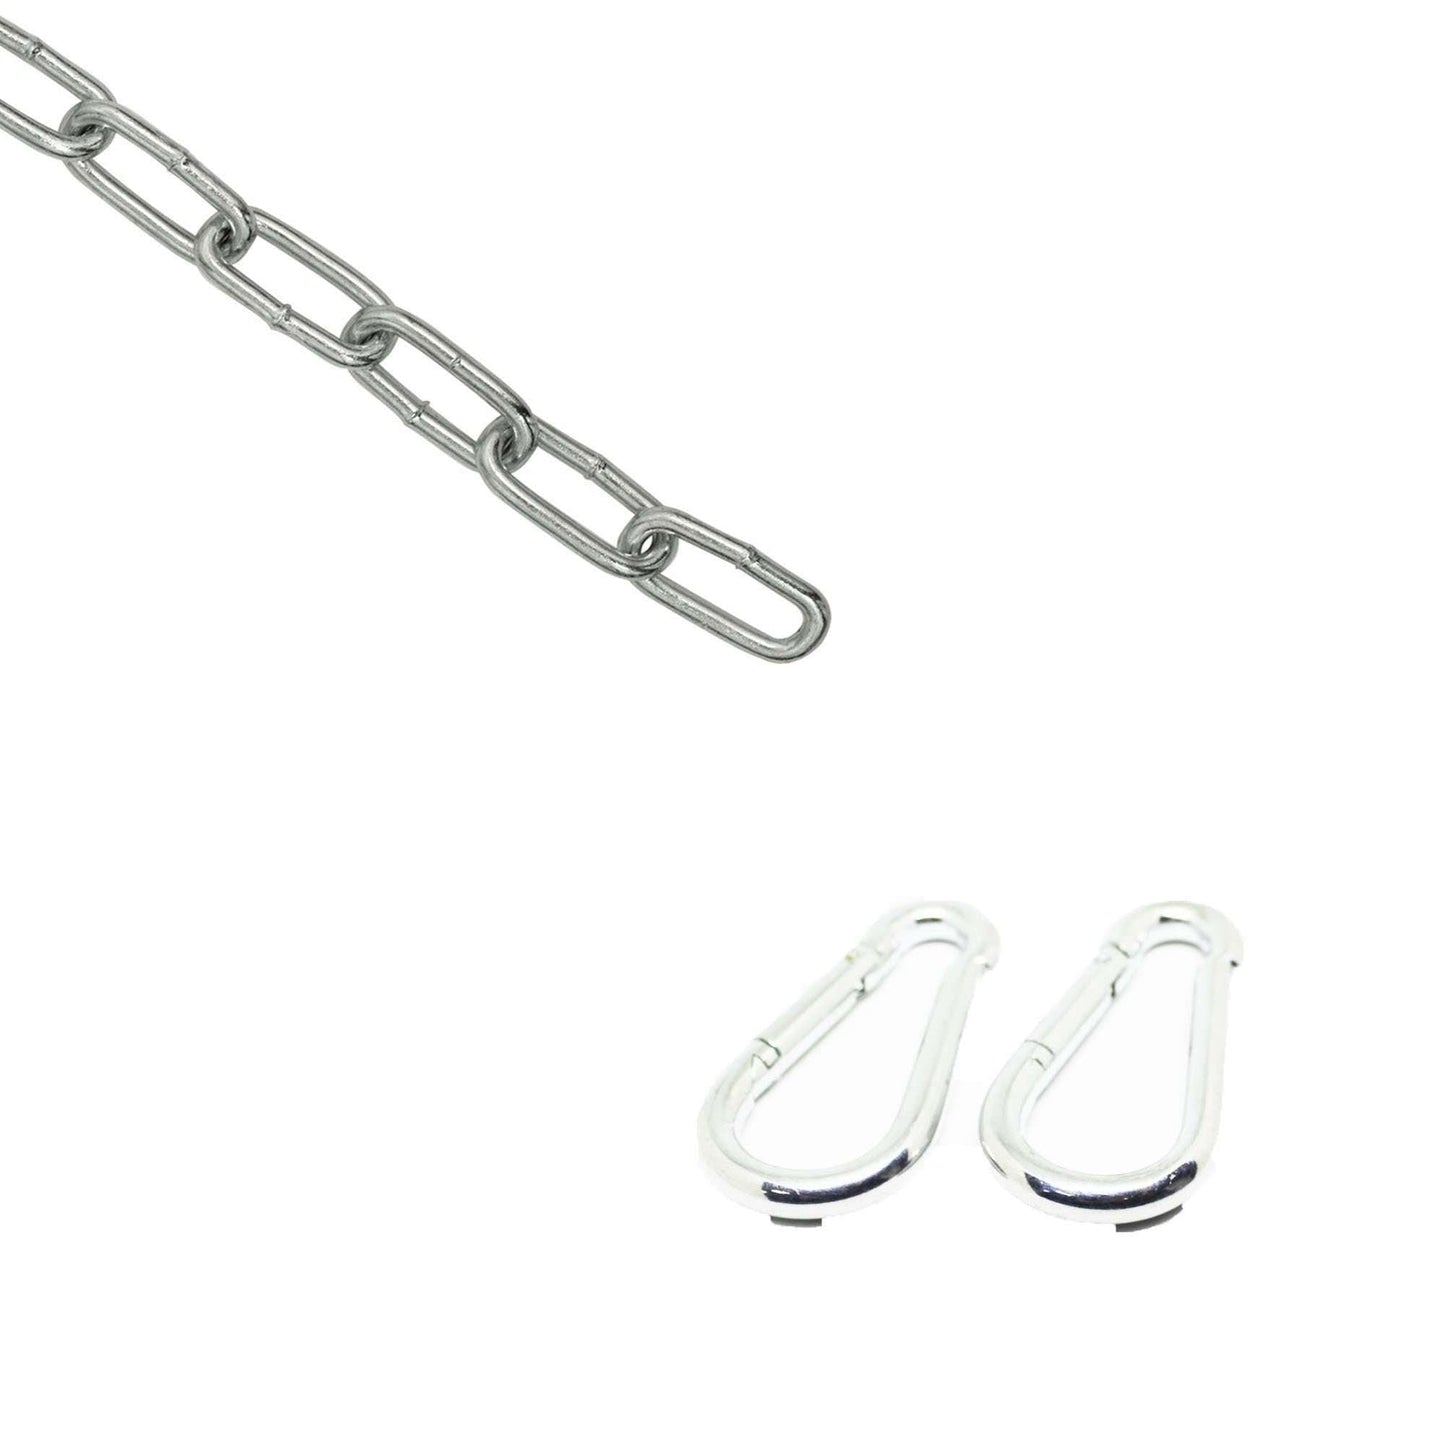 1 Meter Steel Chain with Carabiners - Battle Rope Anchor - Fitness Health 